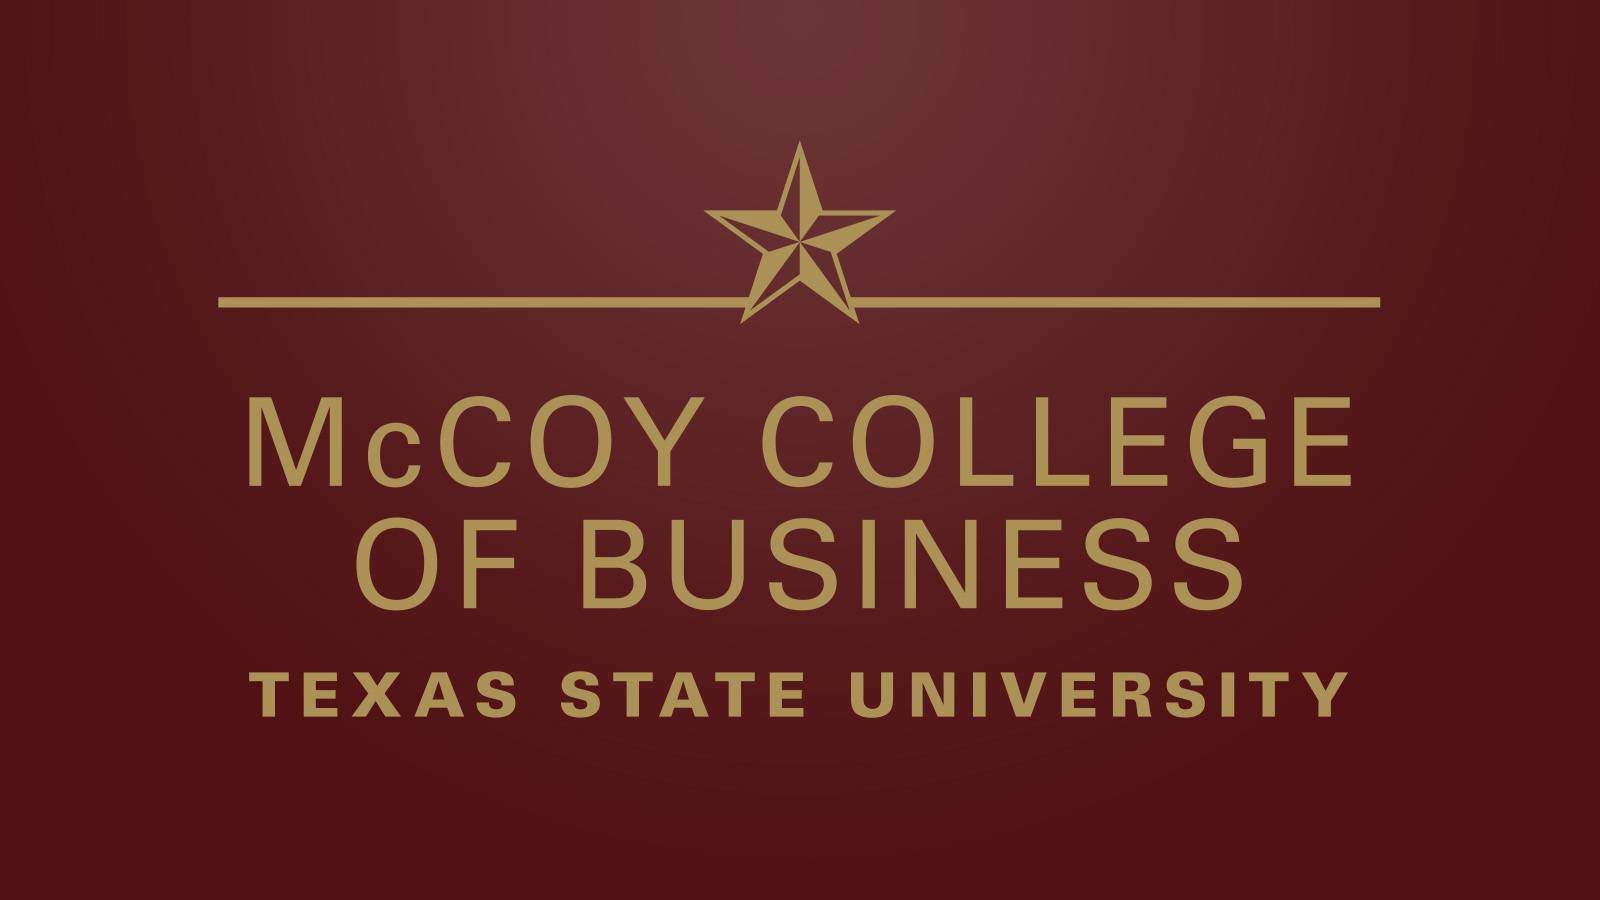 McCoy College of Business logo in gold on maroon background